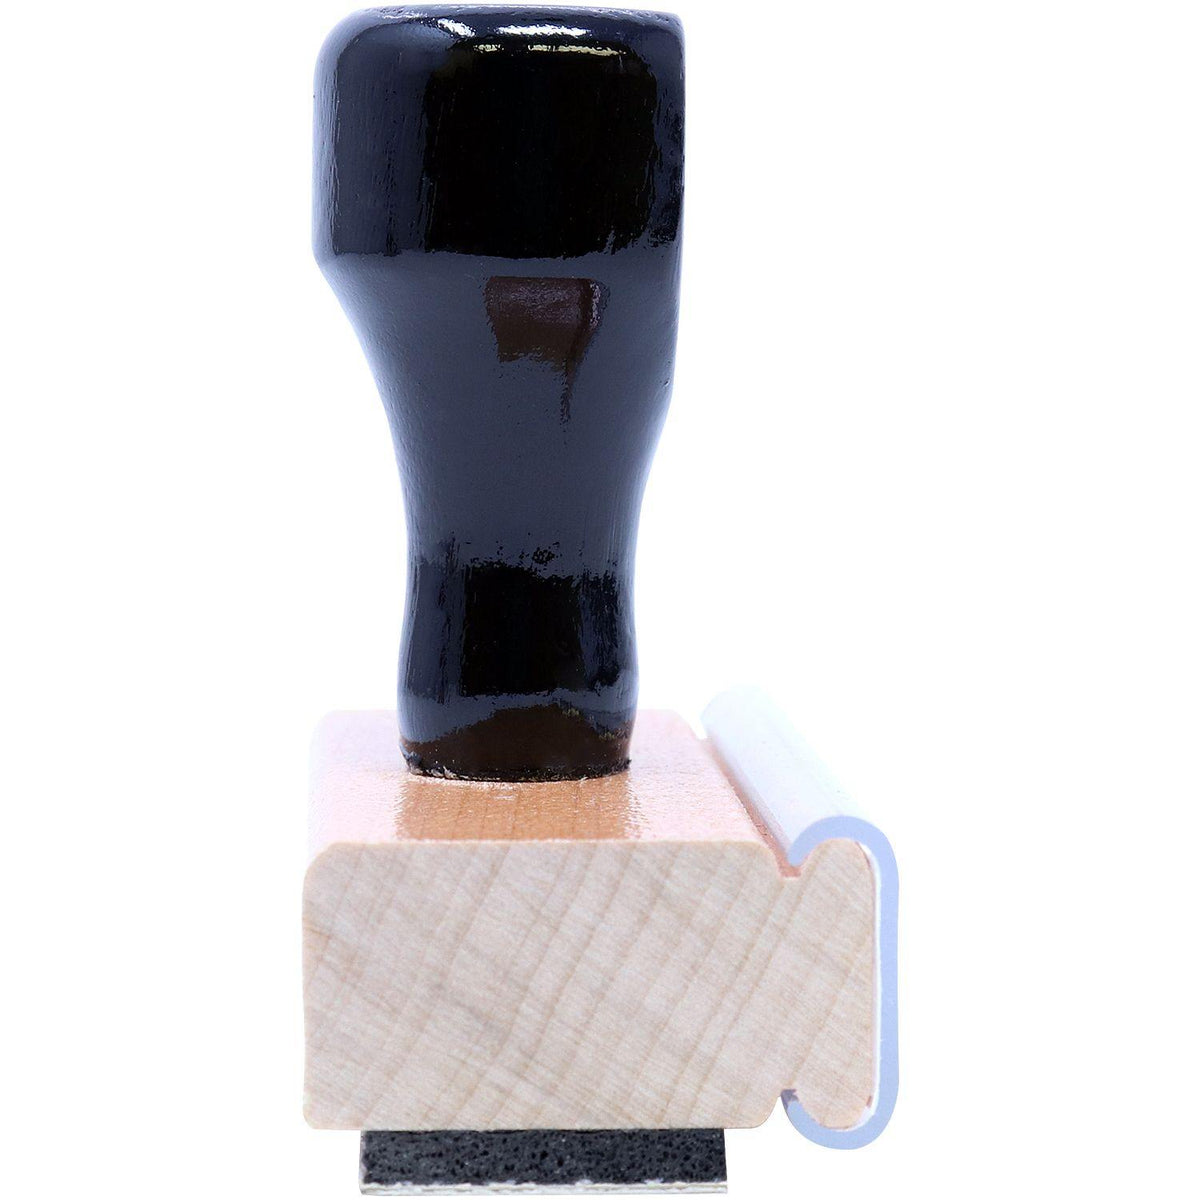 Side View of Large Contact Tracing Rubber Stamp